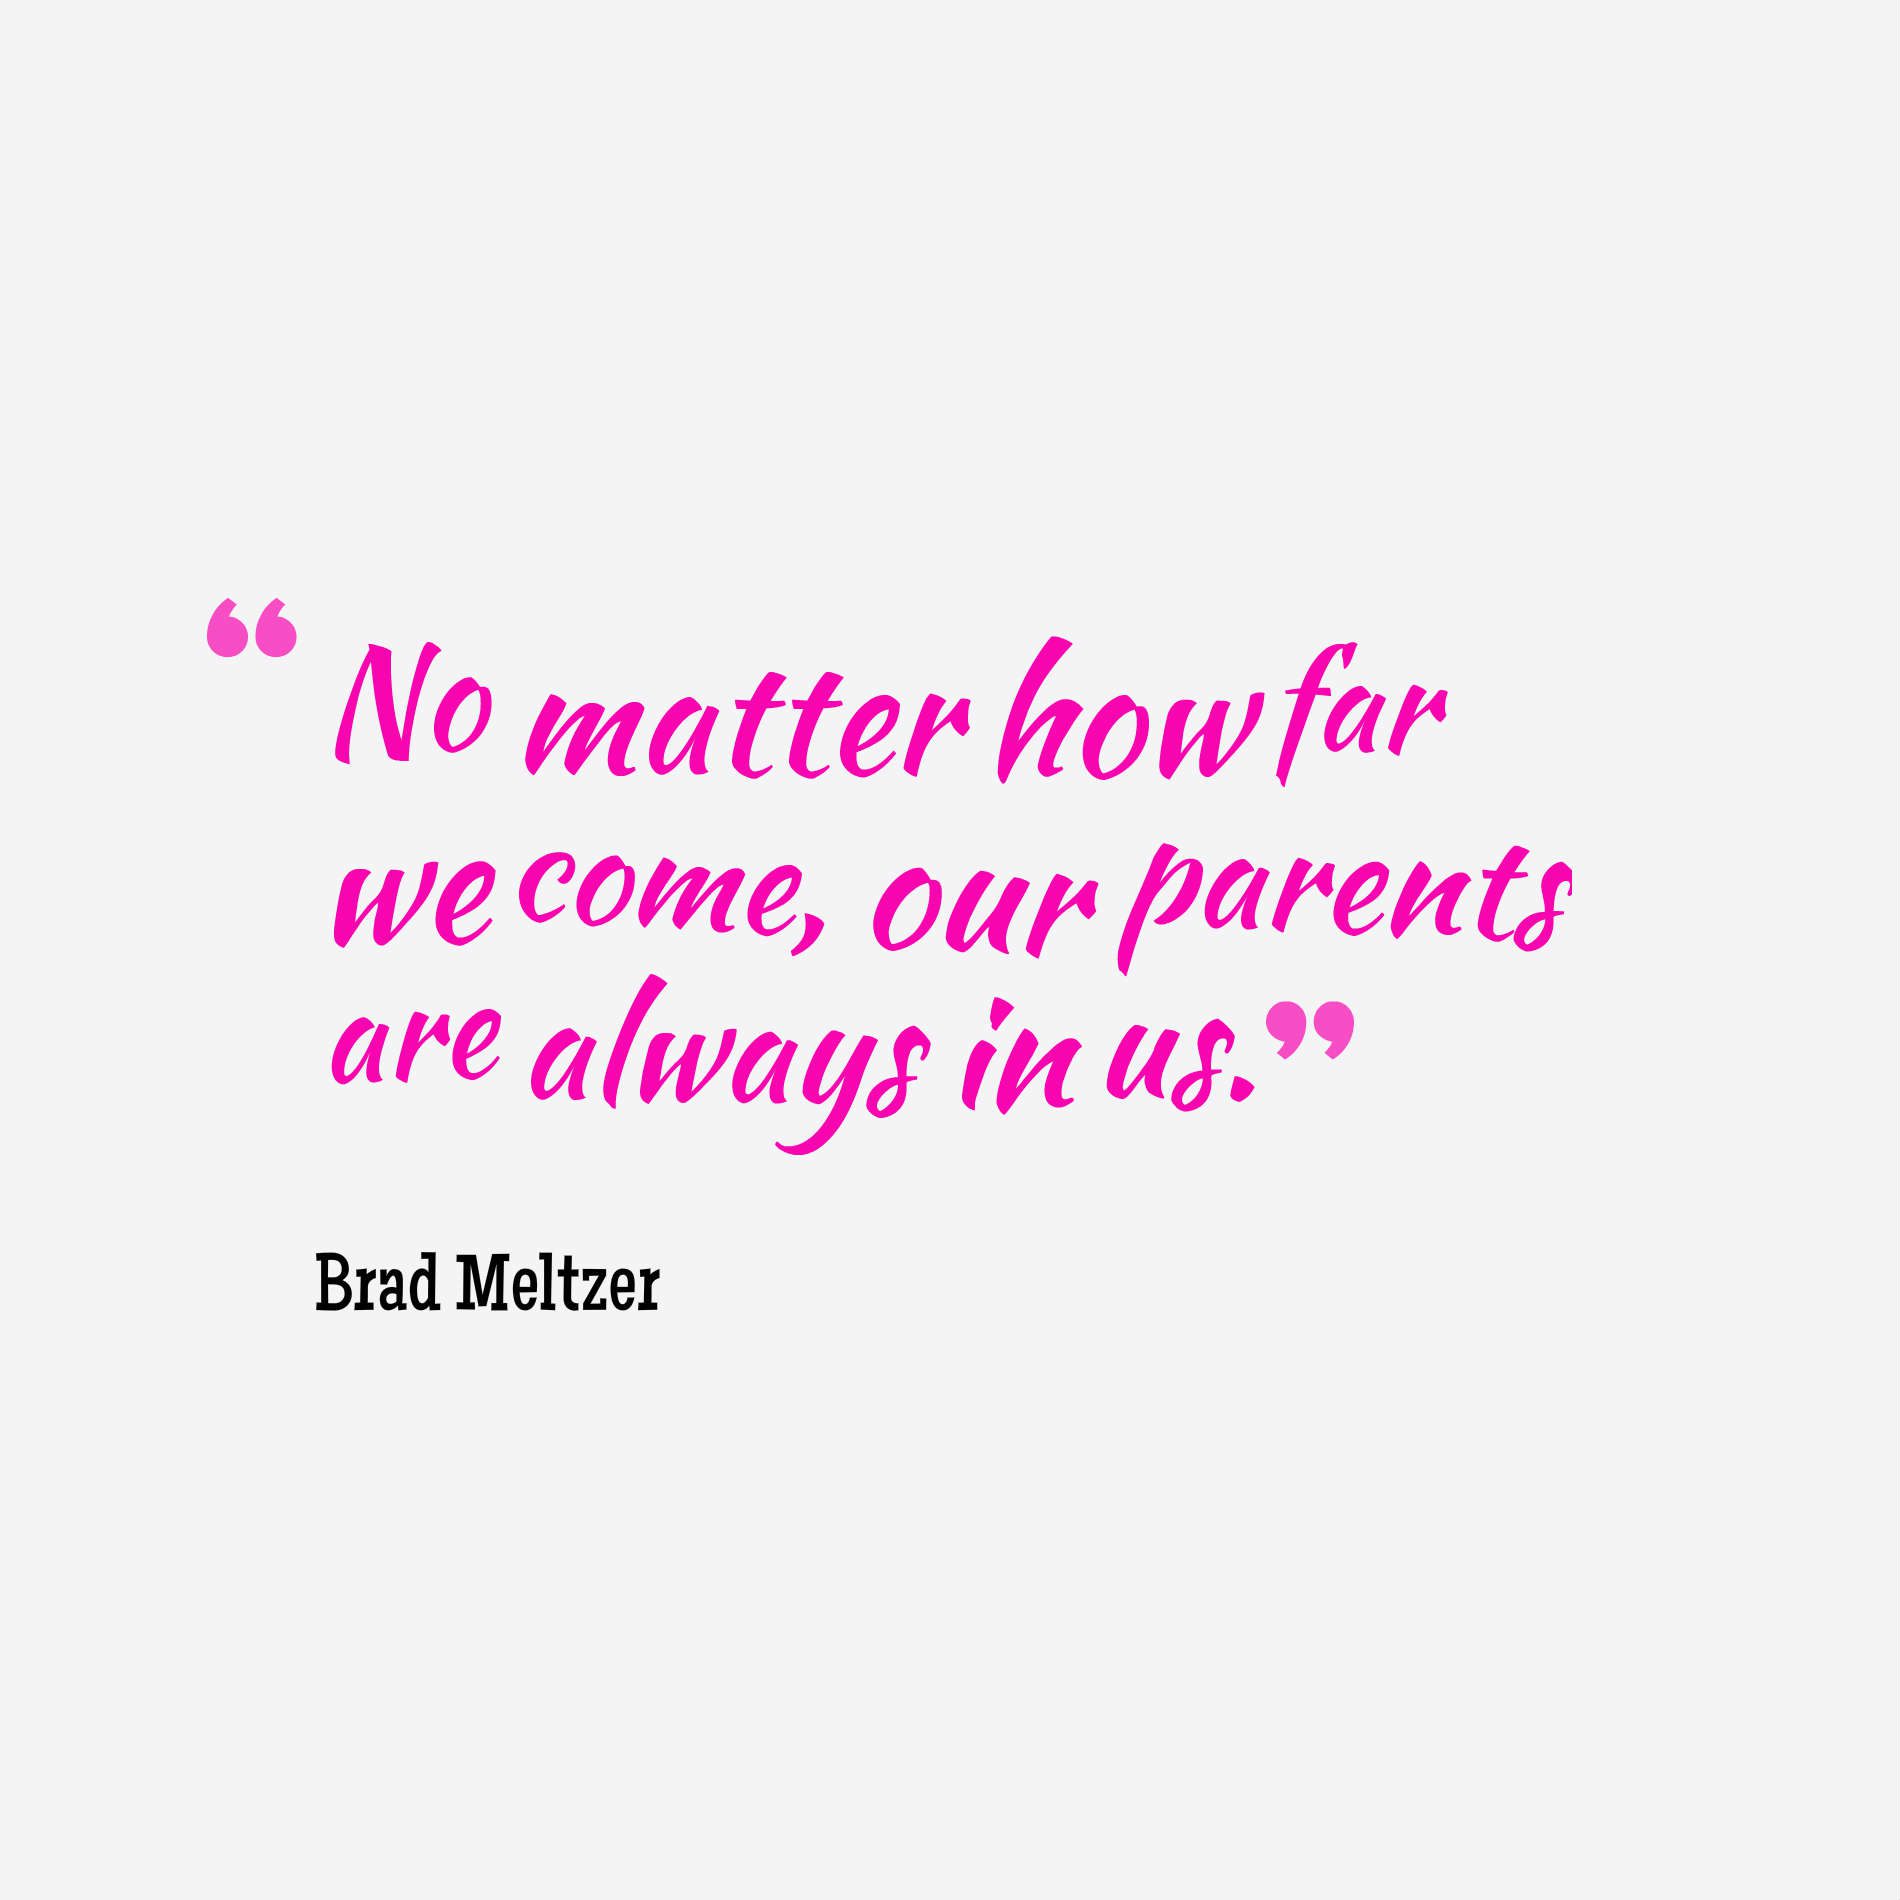 No matter how far we come, our parents are always in us.